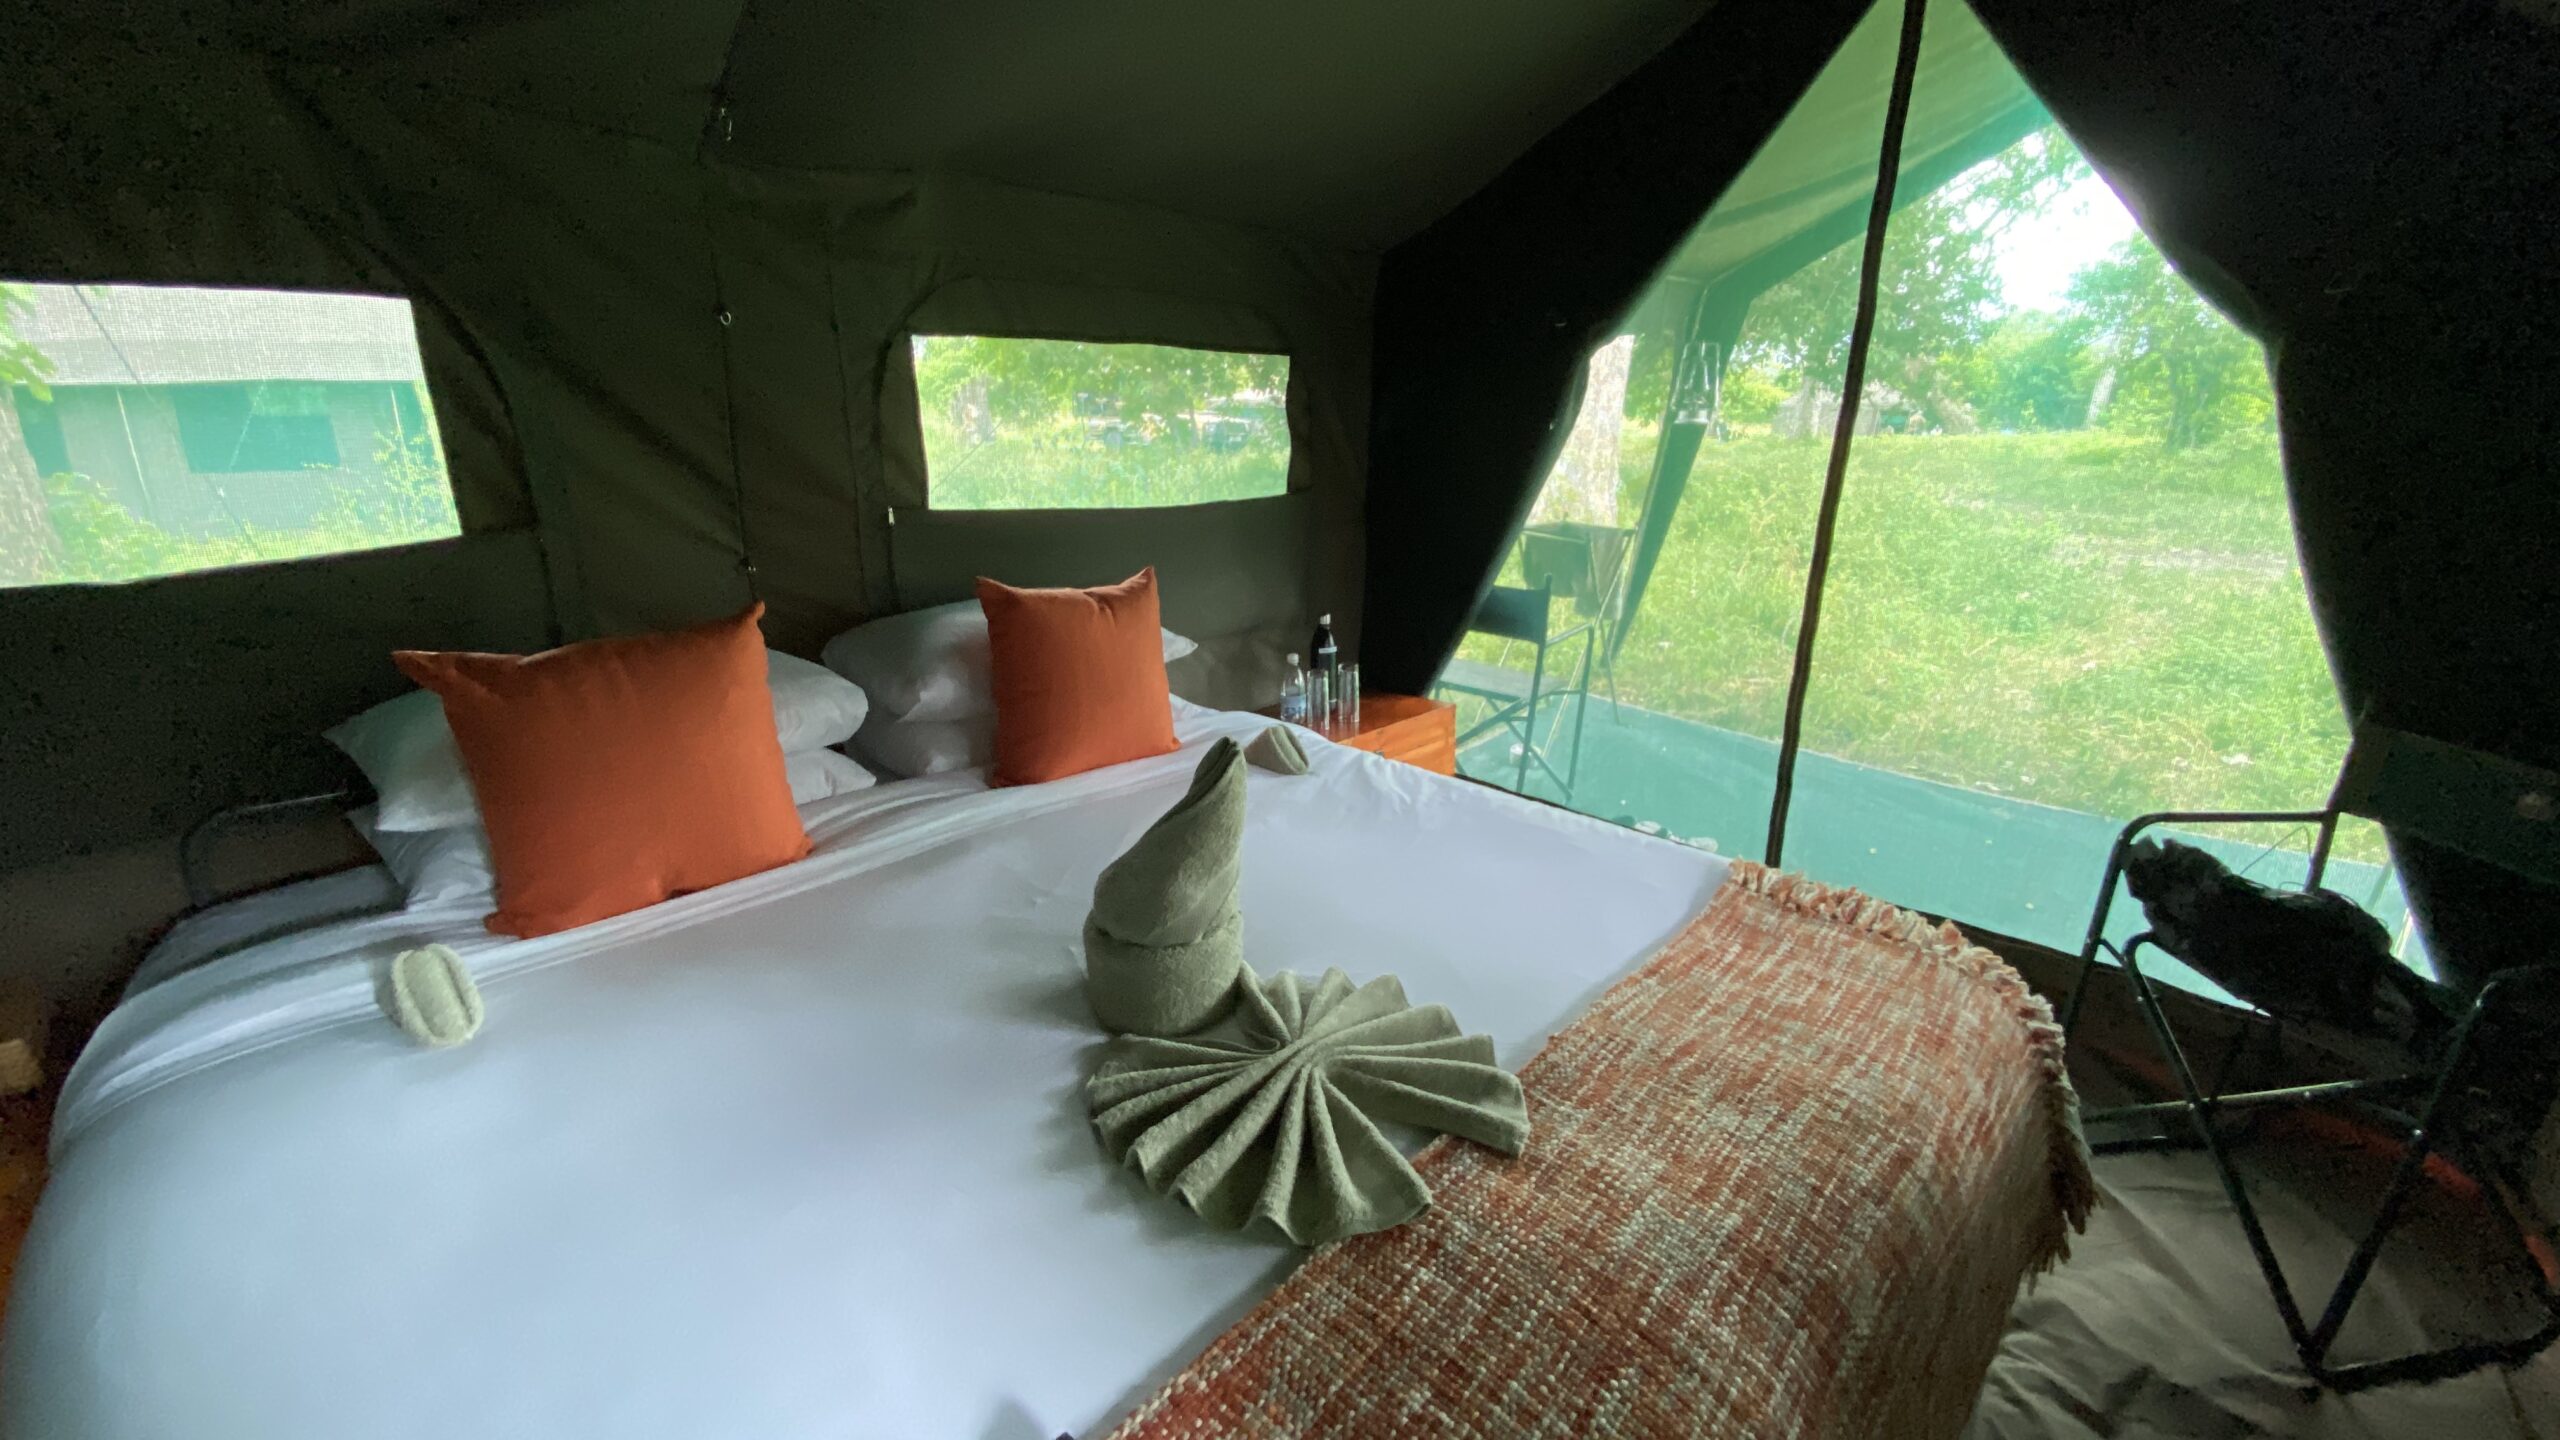 A Brave Africa tent